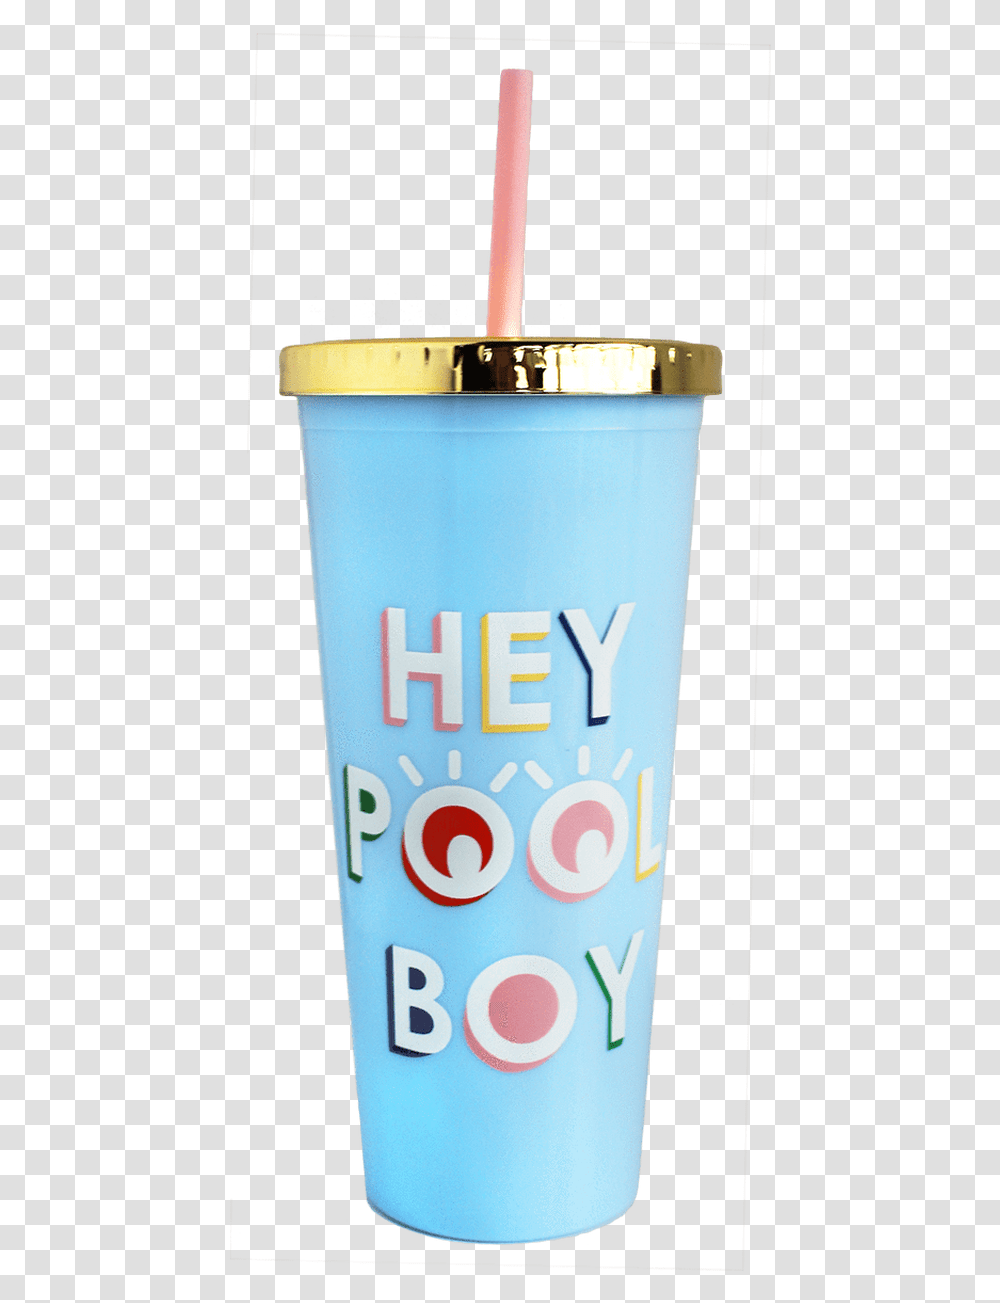 Caffeinated Drink, Shaker, Bottle, Cup Transparent Png